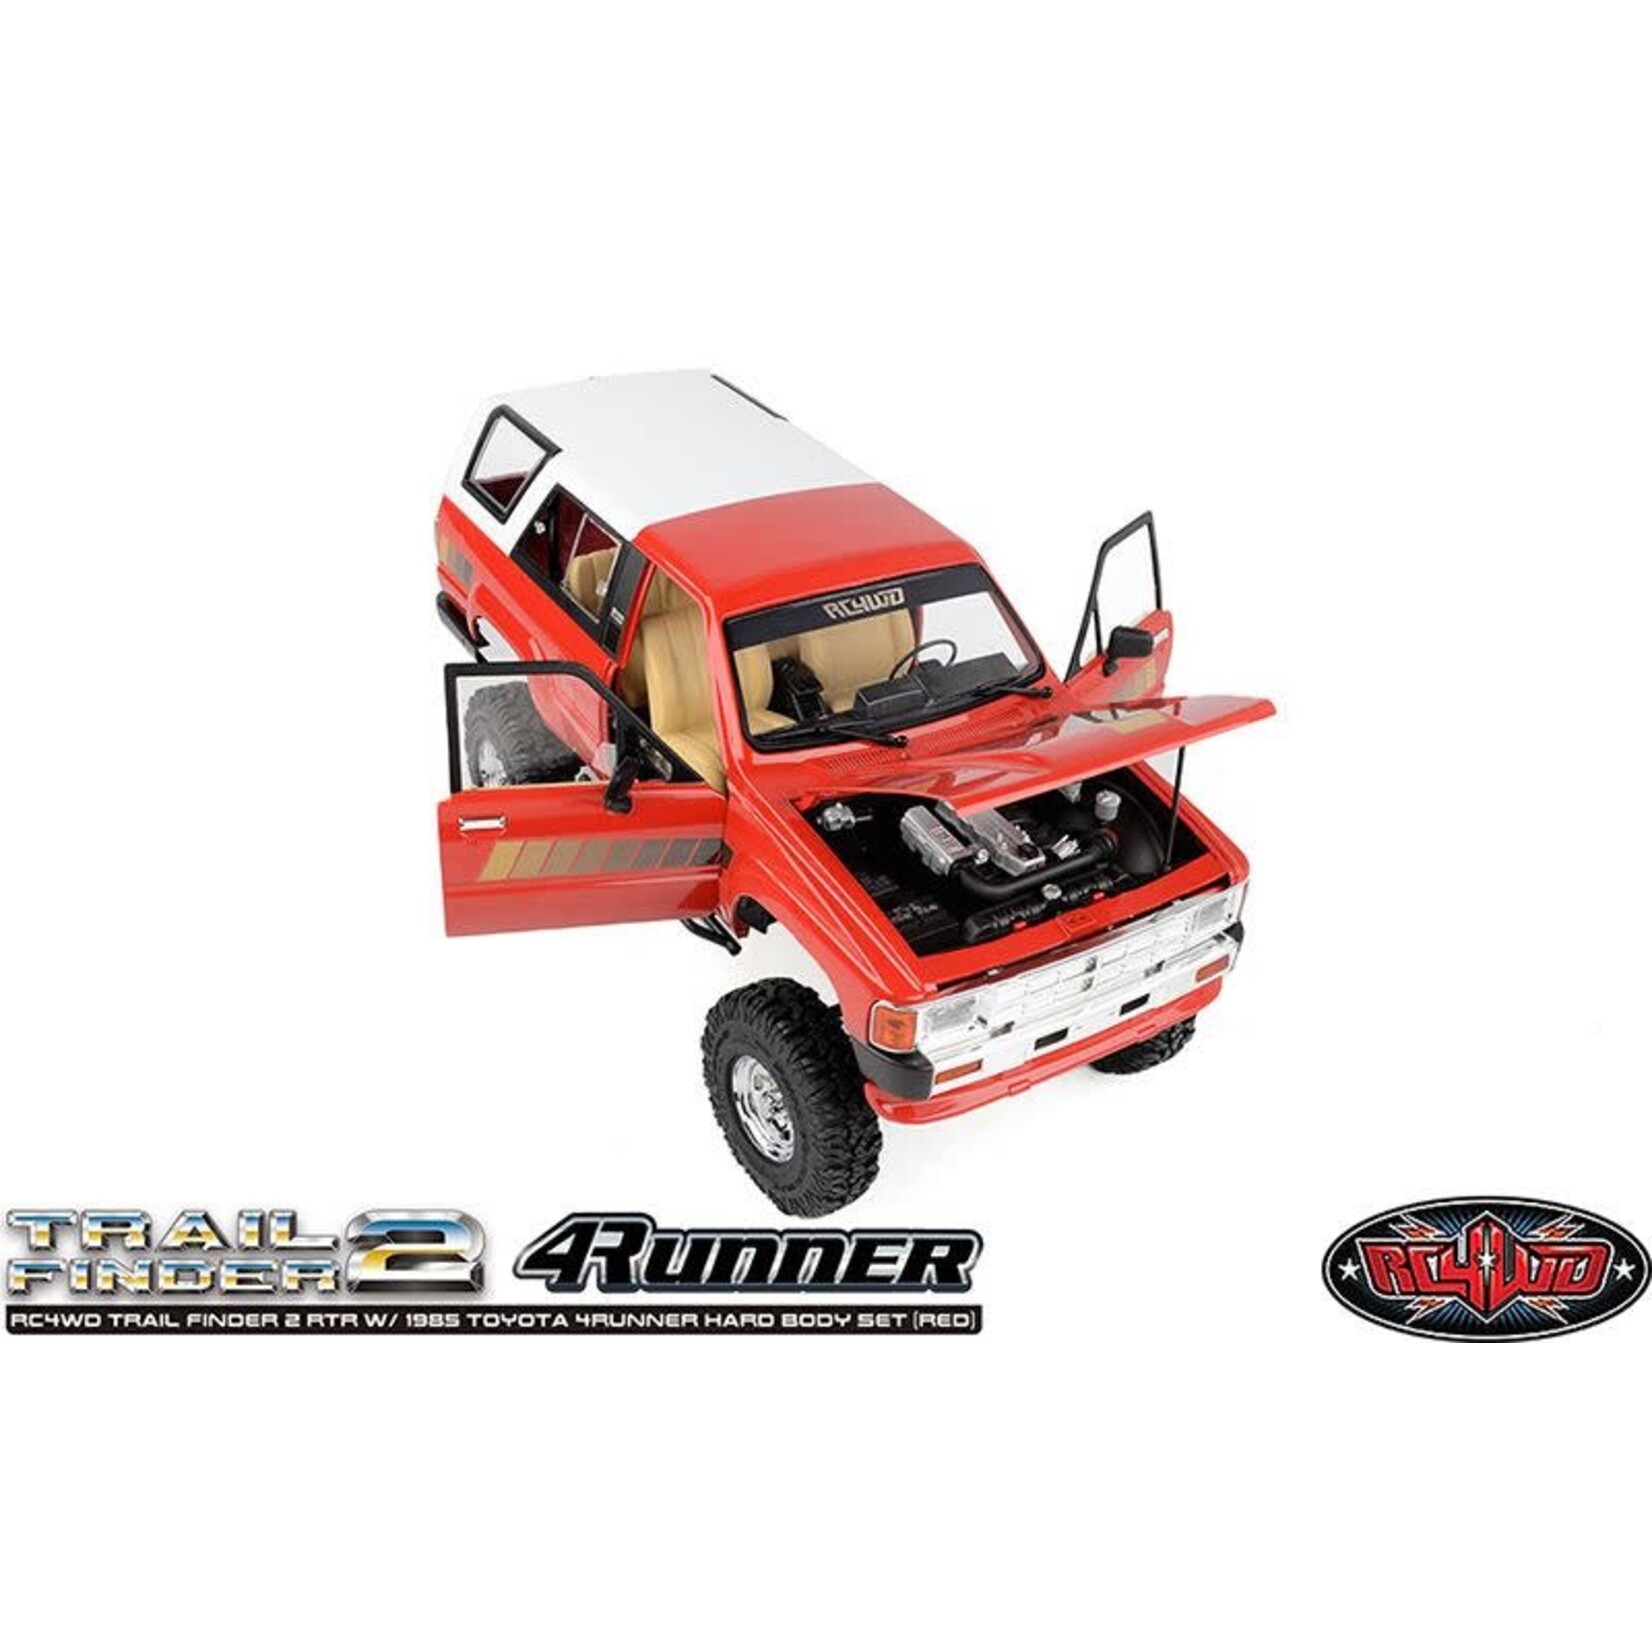 RC4WD 1/10 Trail finder 2 W/1985 Toyota 4Runner Hd Body set Red